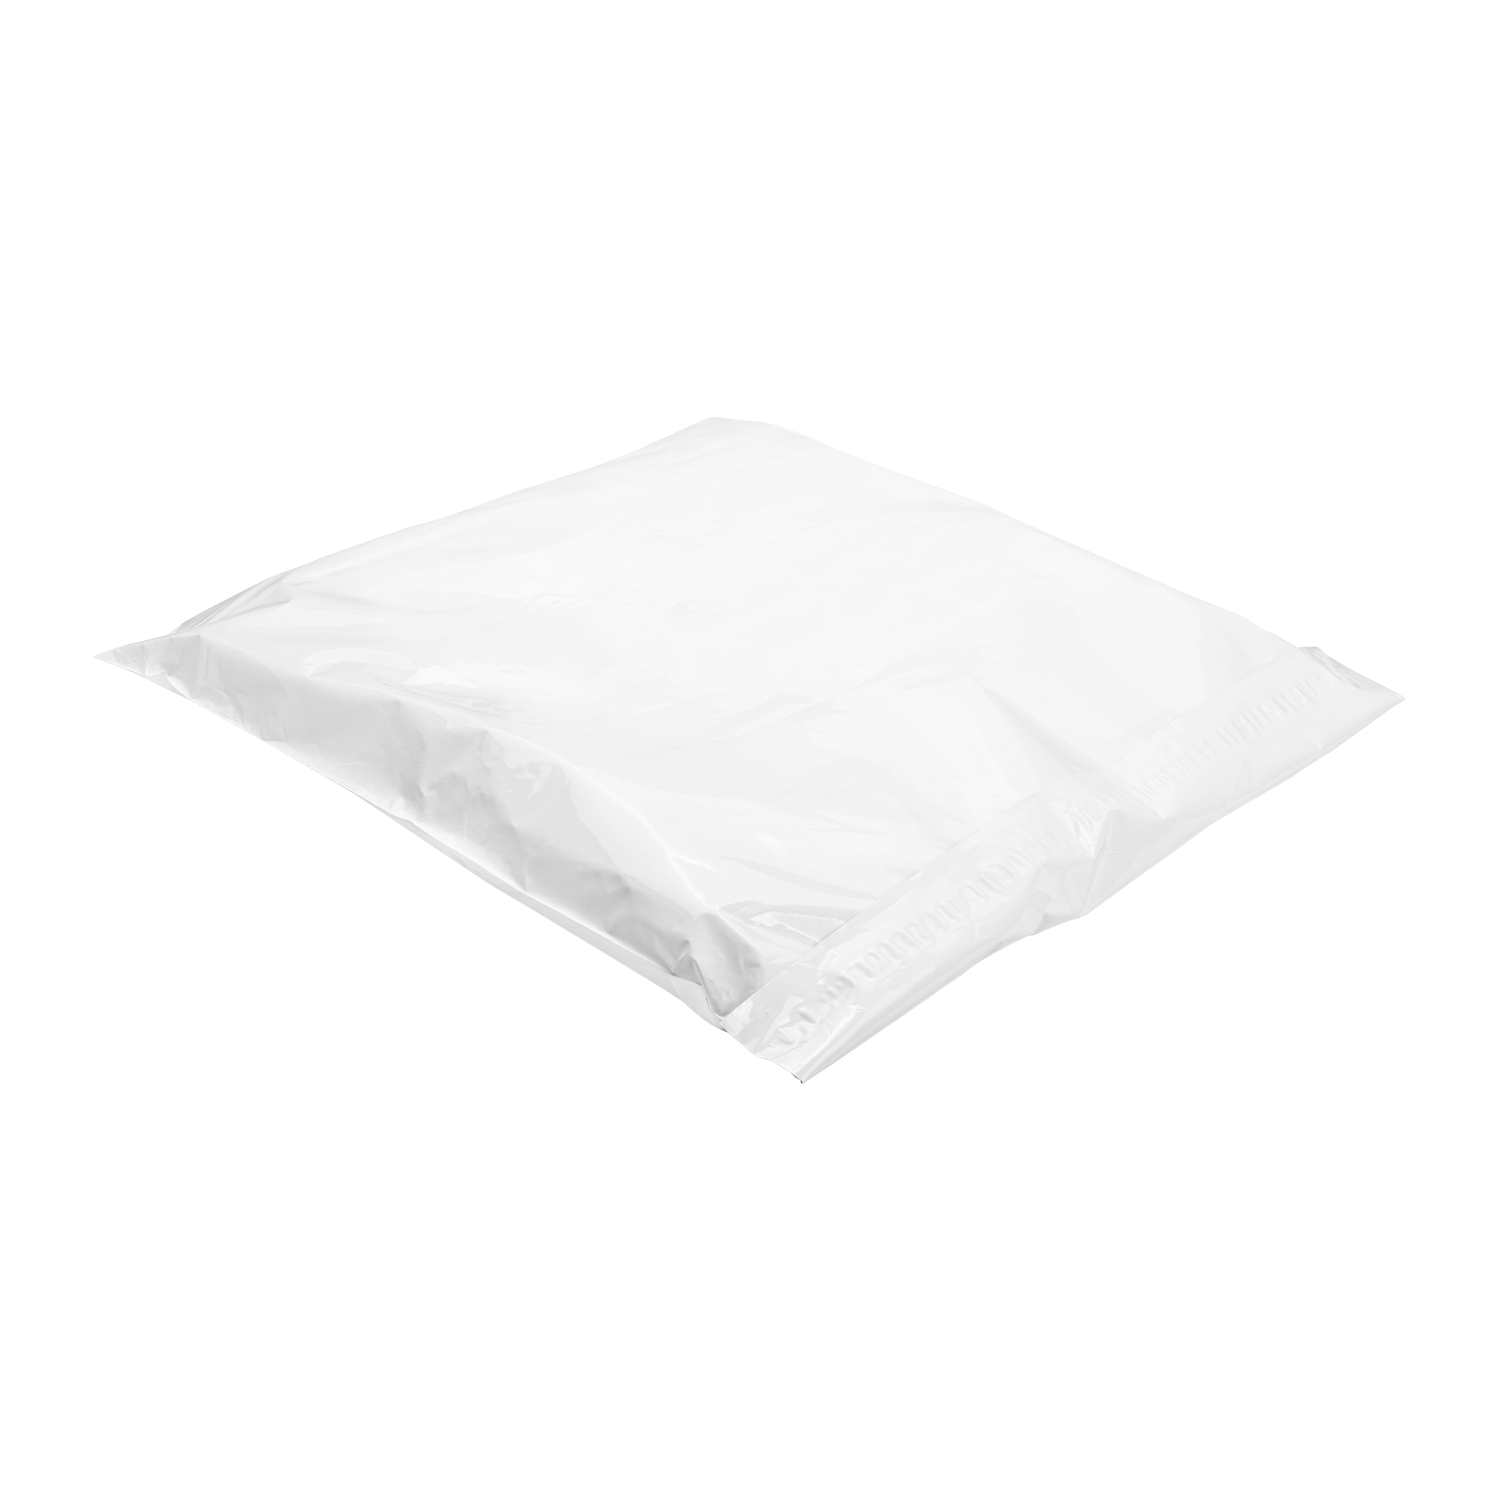 Karat 15.75''x17.33" Poly Mailers with Tamper-Evident Adhesive Closure, White - 500 pcs